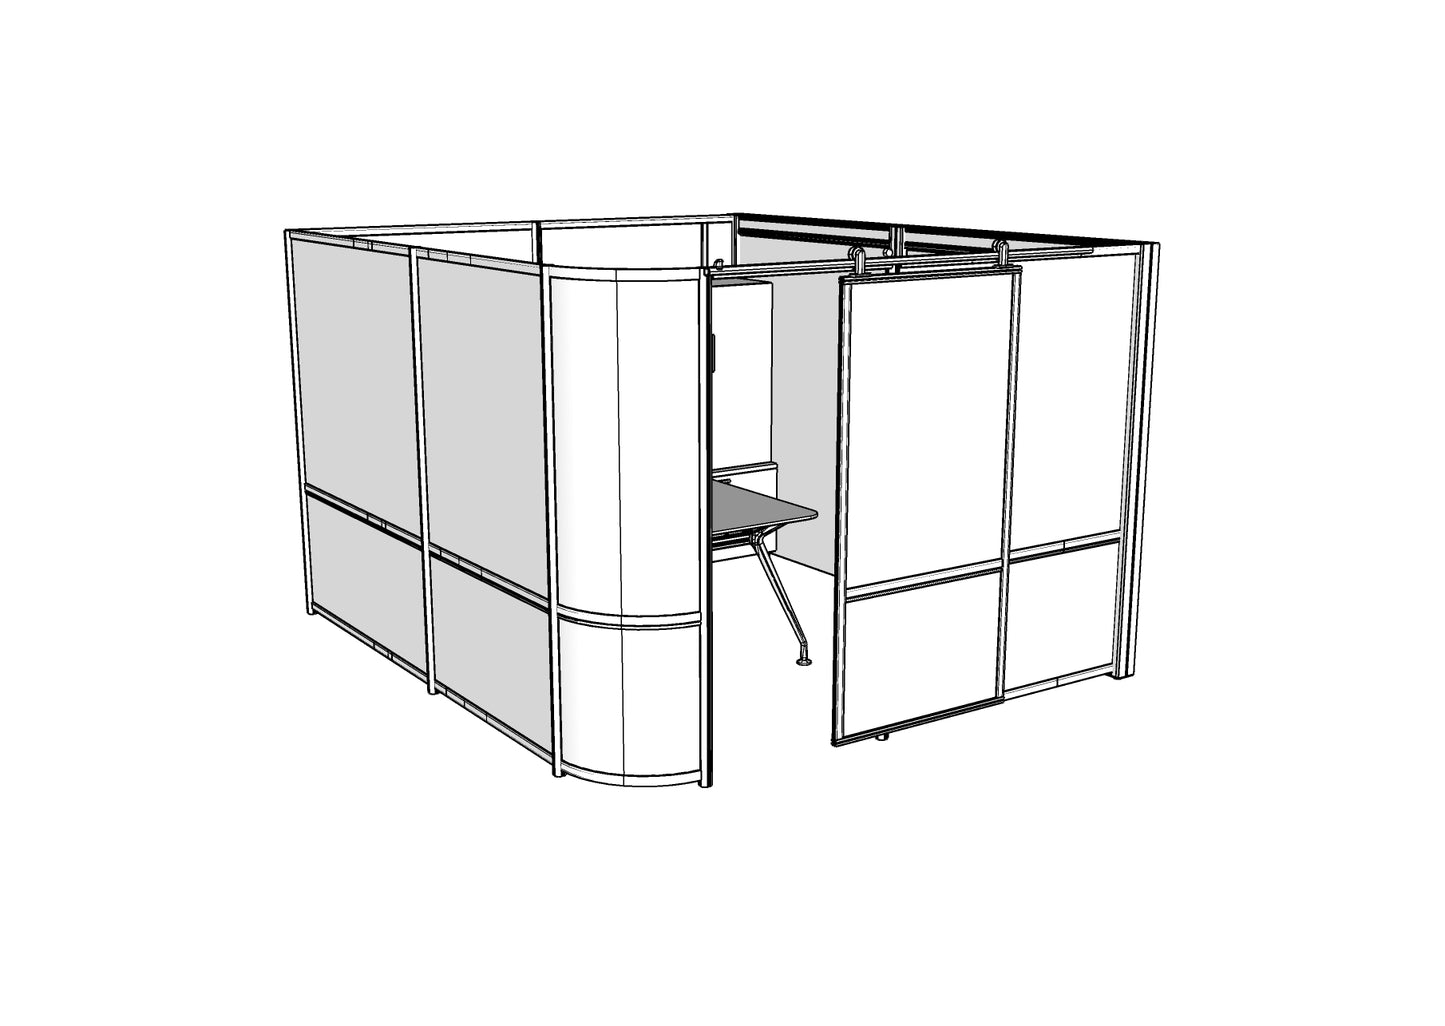 IA005 - Single Enclosed Office/Room with Curved Corner and Sliding Door